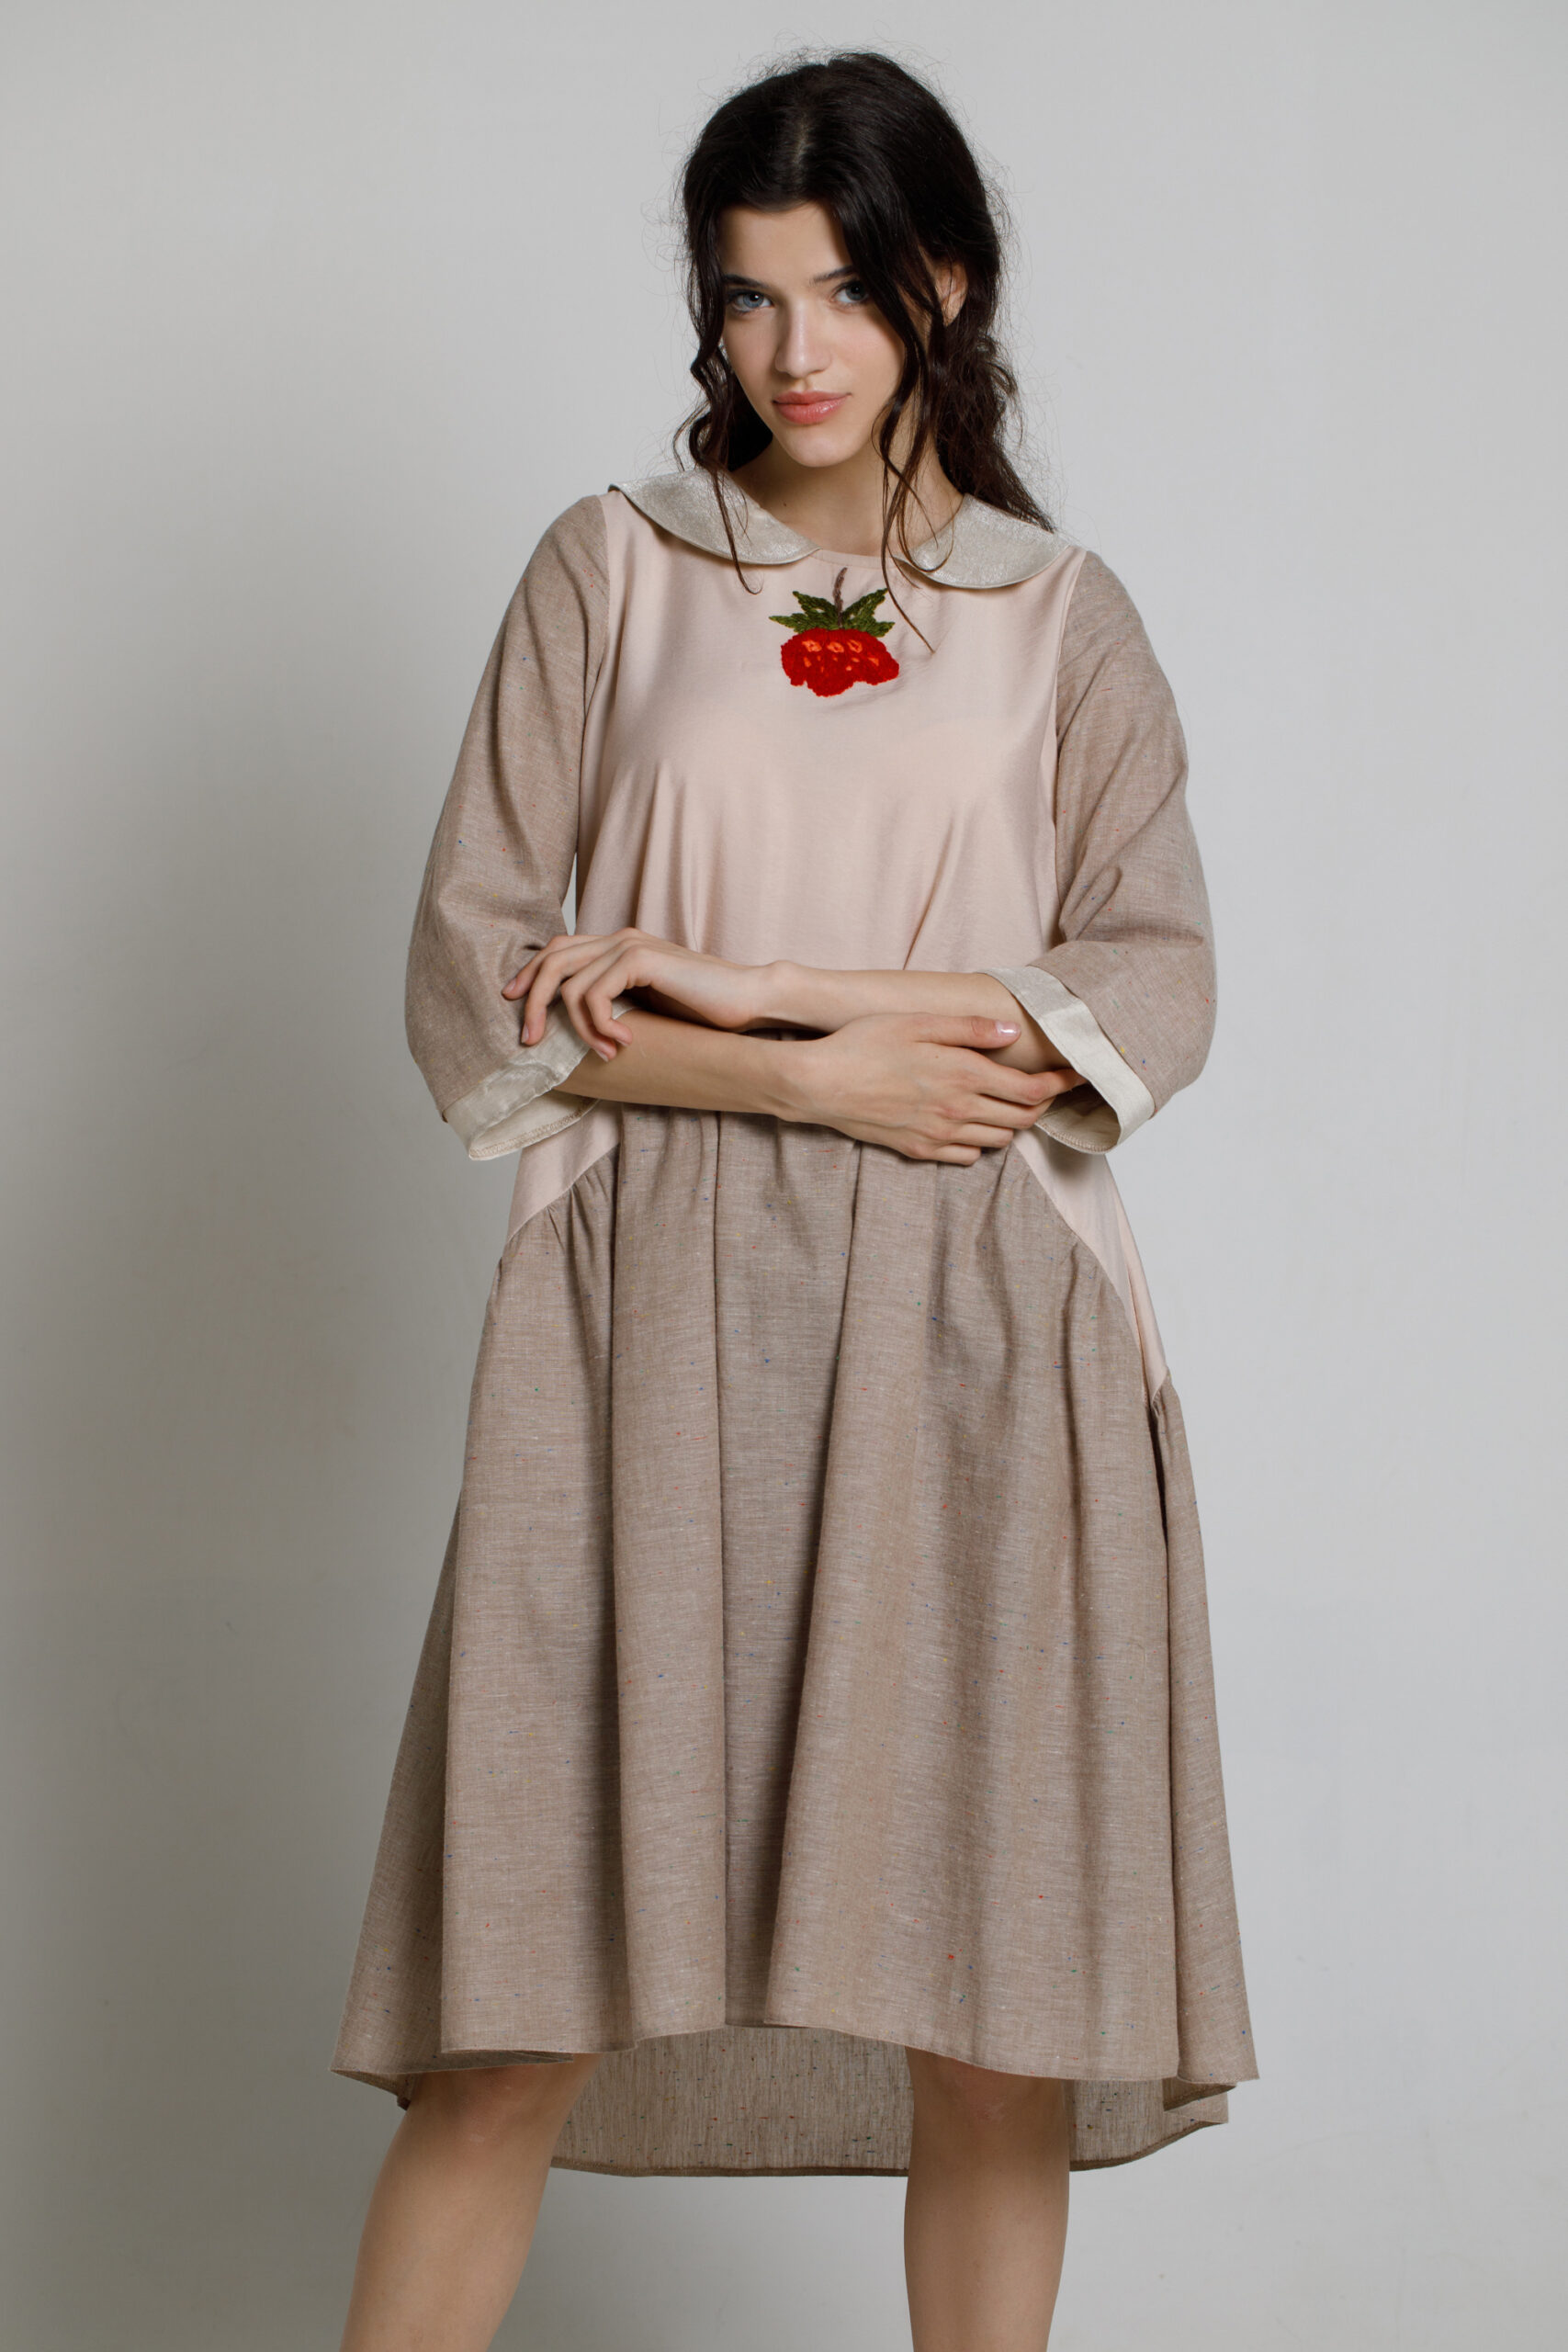 MELINA dress with round collar and embroidery. Natural fabrics, original design, handmade embroidery